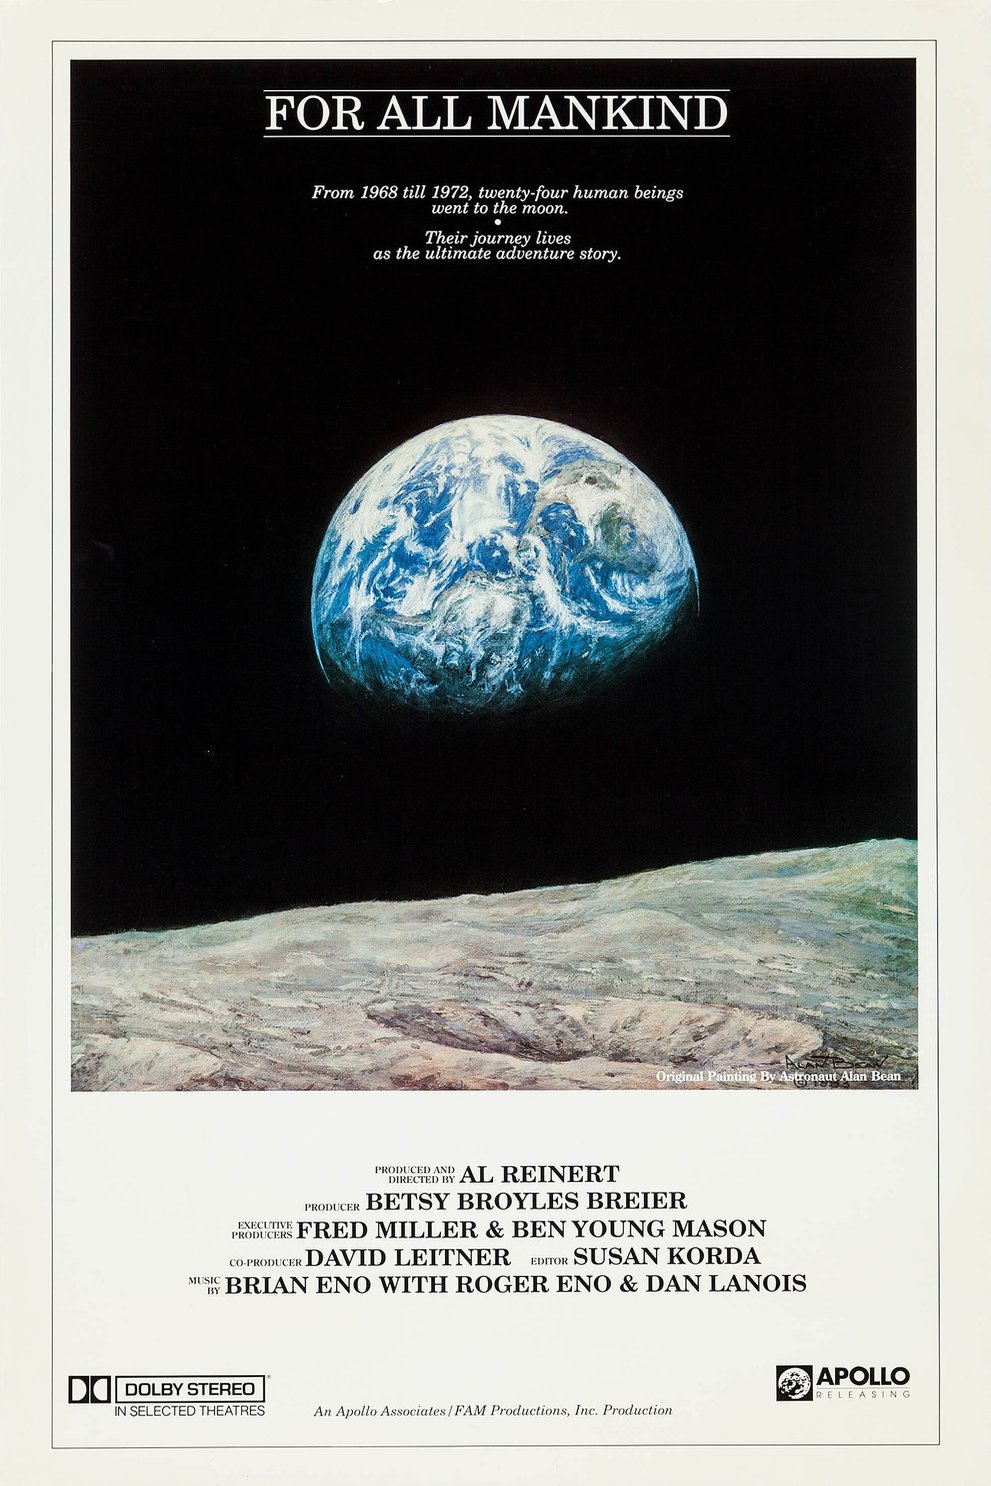 Poster of the movie For All Mankind